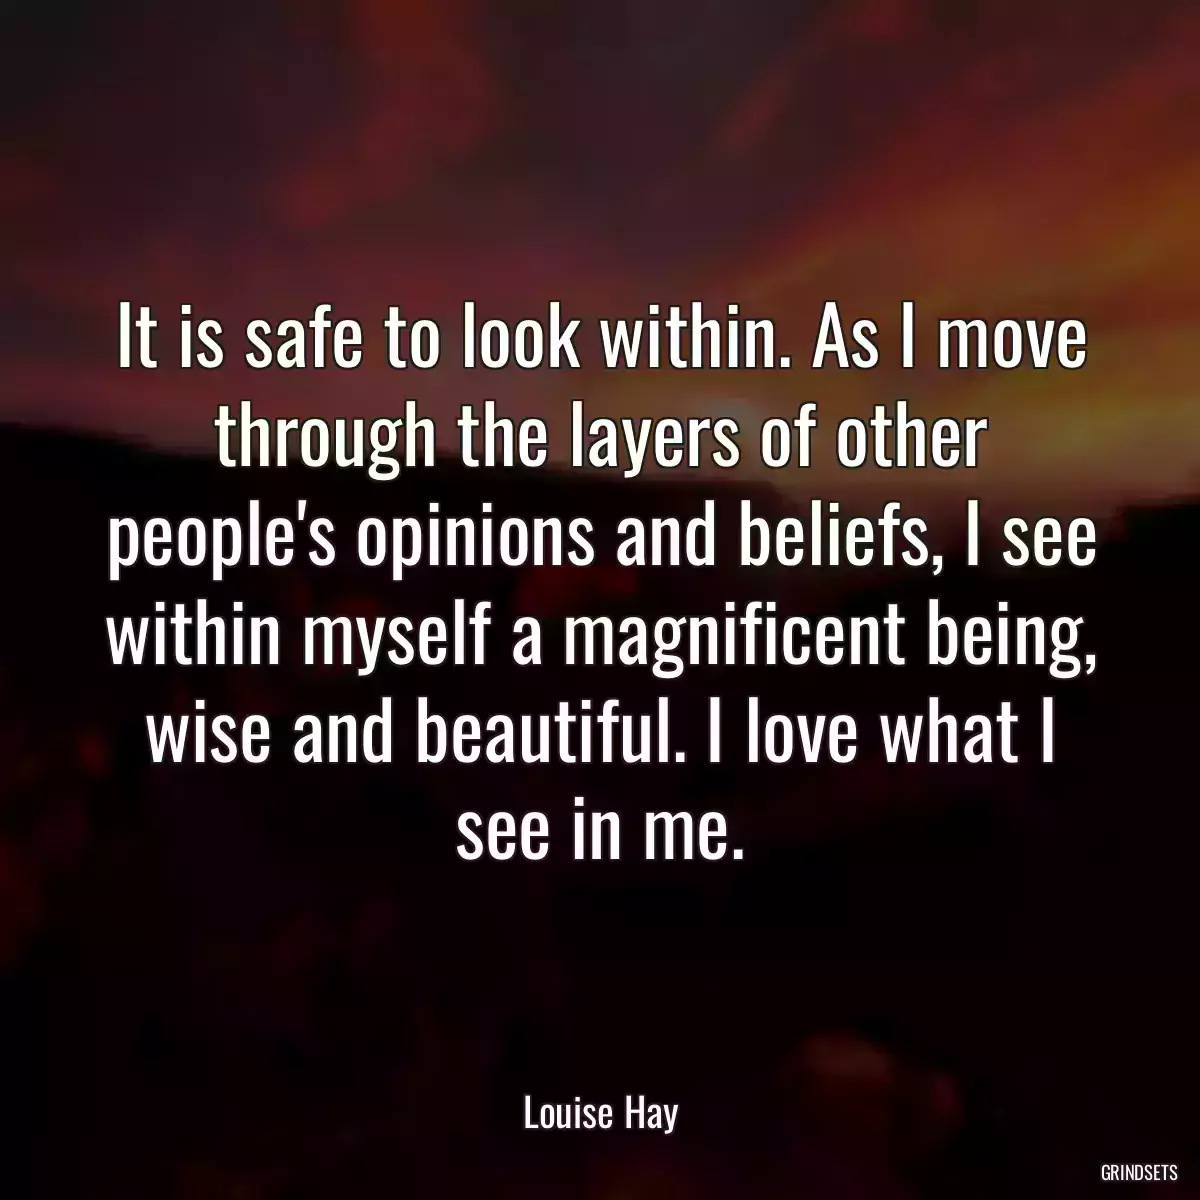 It is safe to look within. As I move through the layers of other people\'s opinions and beliefs, I see within myself a magnificent being, wise and beautiful. I love what I see in me.